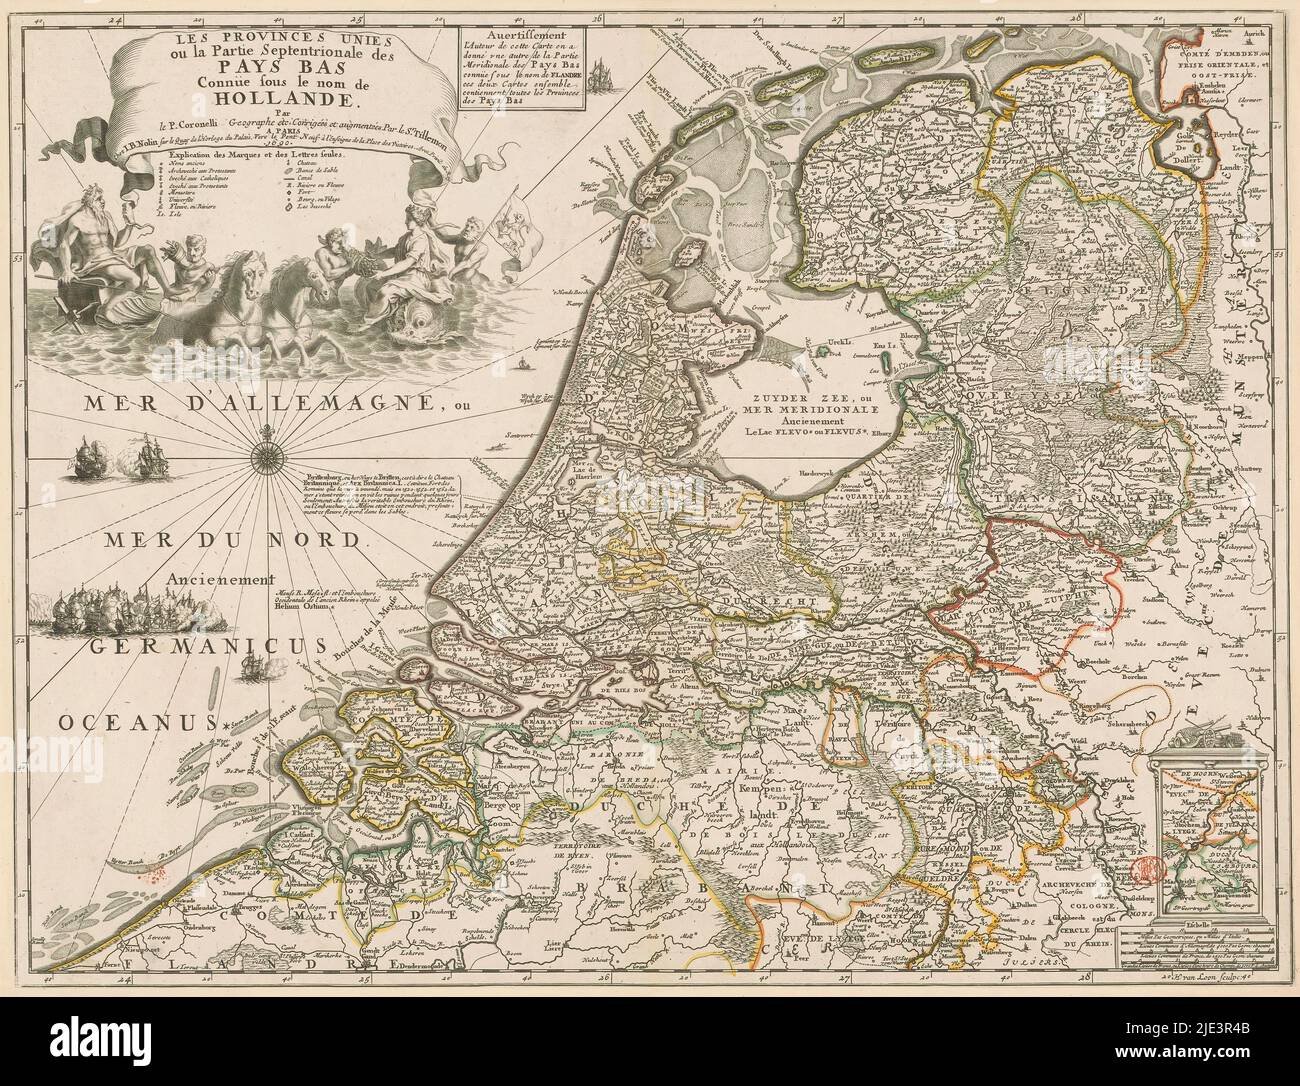 Map of the Republic of the Seven United Netherlands, Les Provinces Unies ou la partie septentrionale des Pays Bas connue sous le nom de Hollande (title on object), French map of the Republic. Top left cartouche with title, below legend and a mythological representation with Neptune, a female figure (possibly Salacia) and three tritons. Next to title cartouche a cartouche with advertisement for a map of the Southern Netherlands by the same publisher. Bottom right cartouche with an inset of part of present-day Limburg (part that belonged to State Brabant at the time). Underneath scale bar Stock Photo